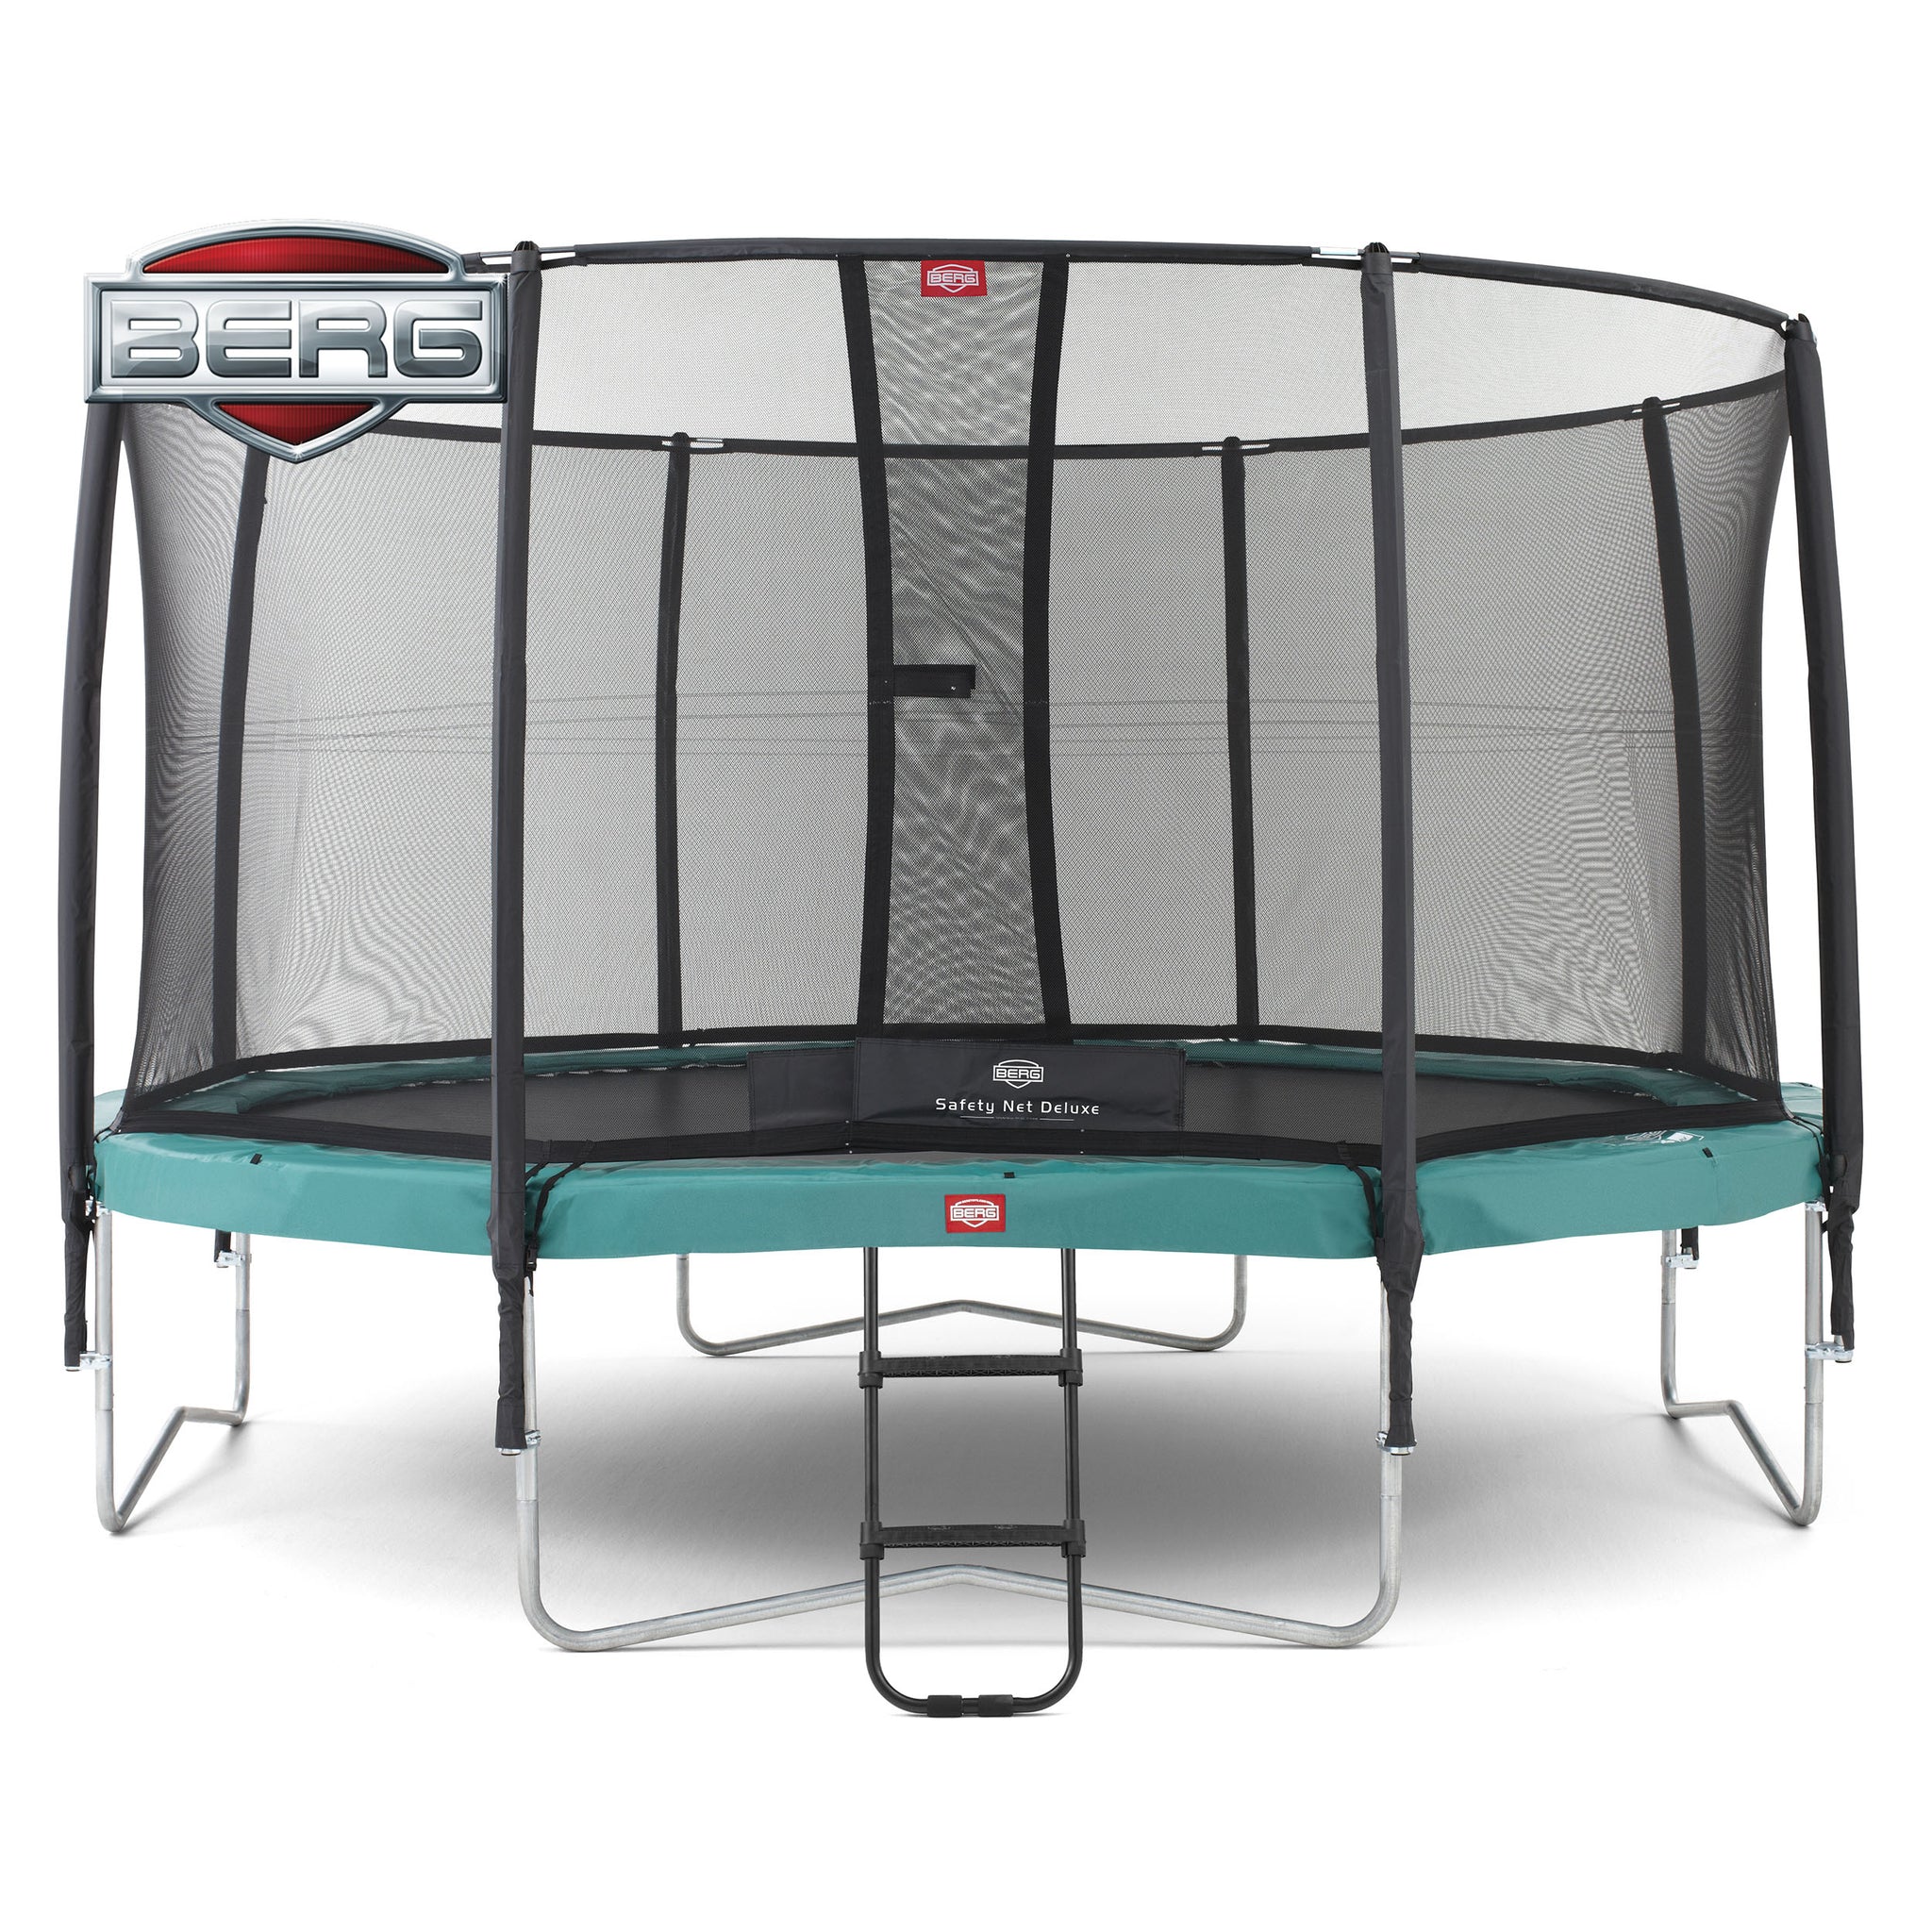 Champion USA Deluxe Trampoline with + Net